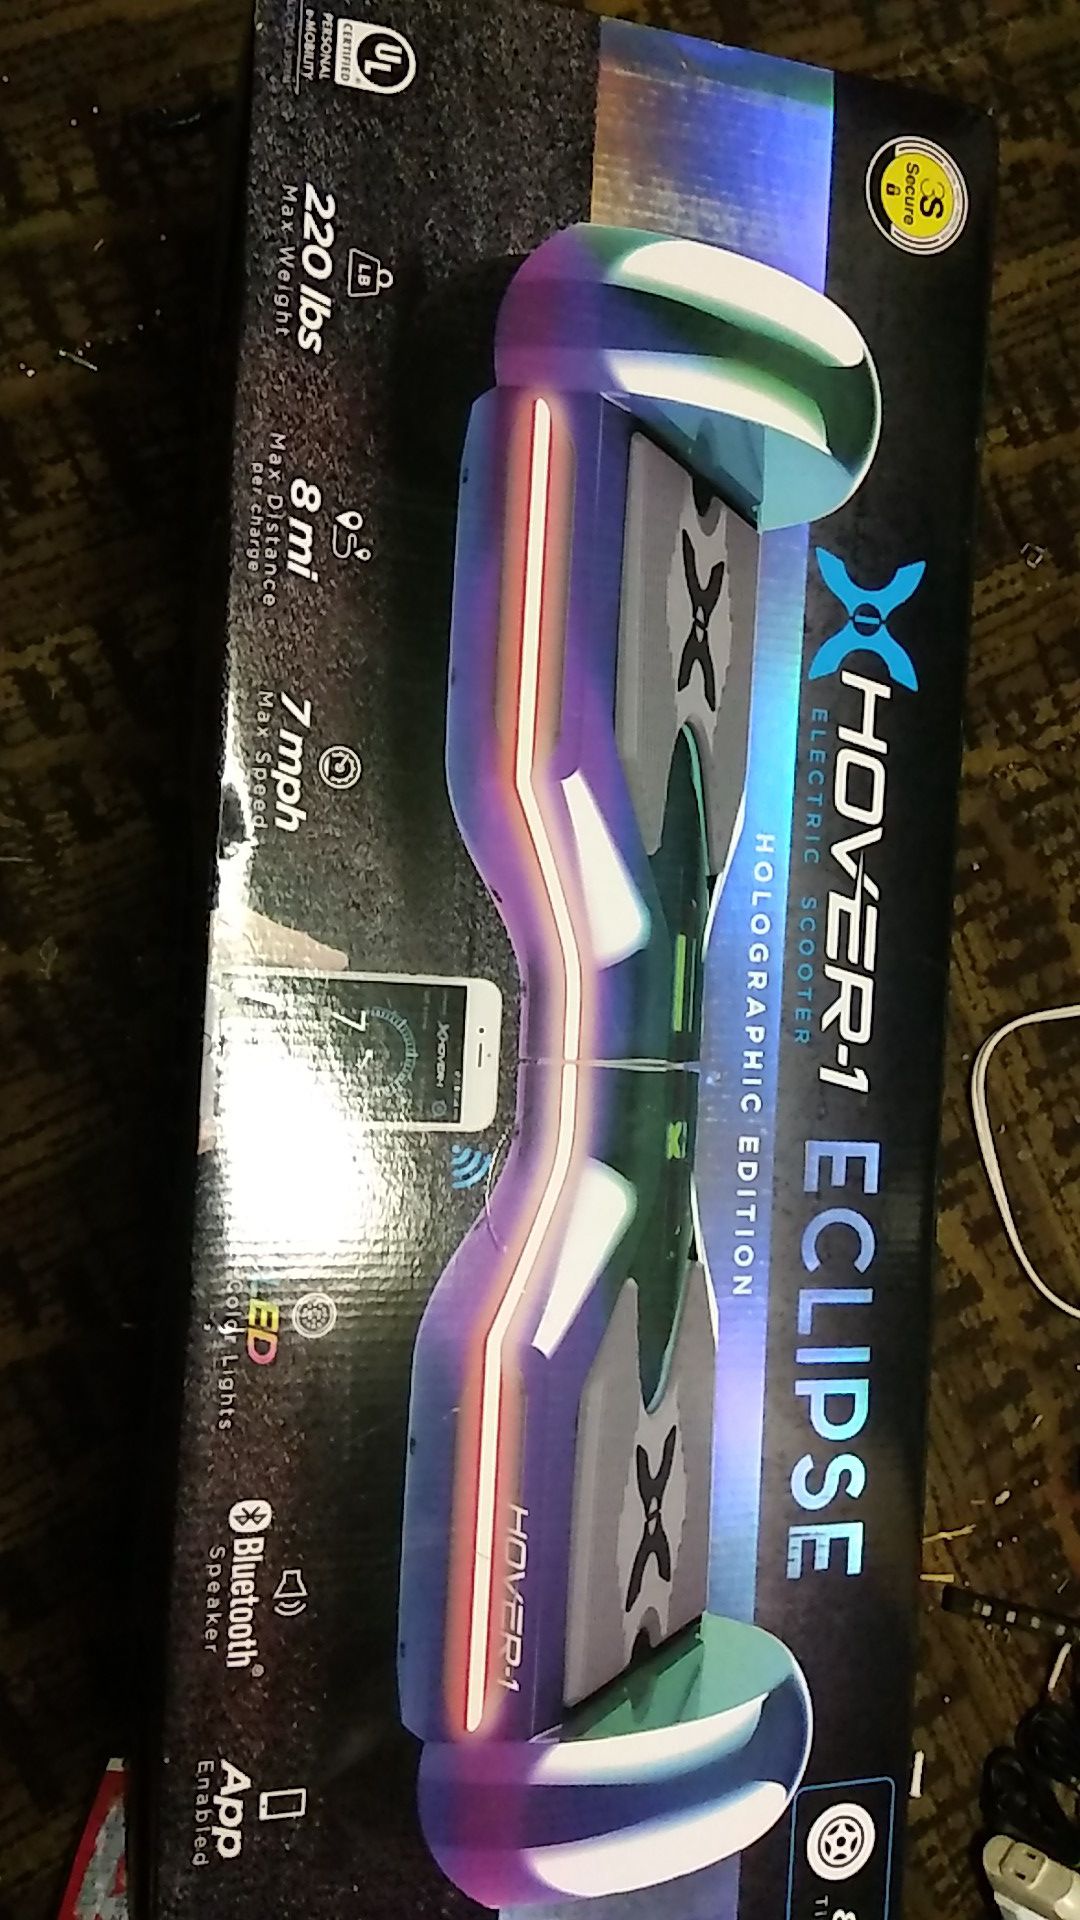 Hover-1 eclipse Holographic edition